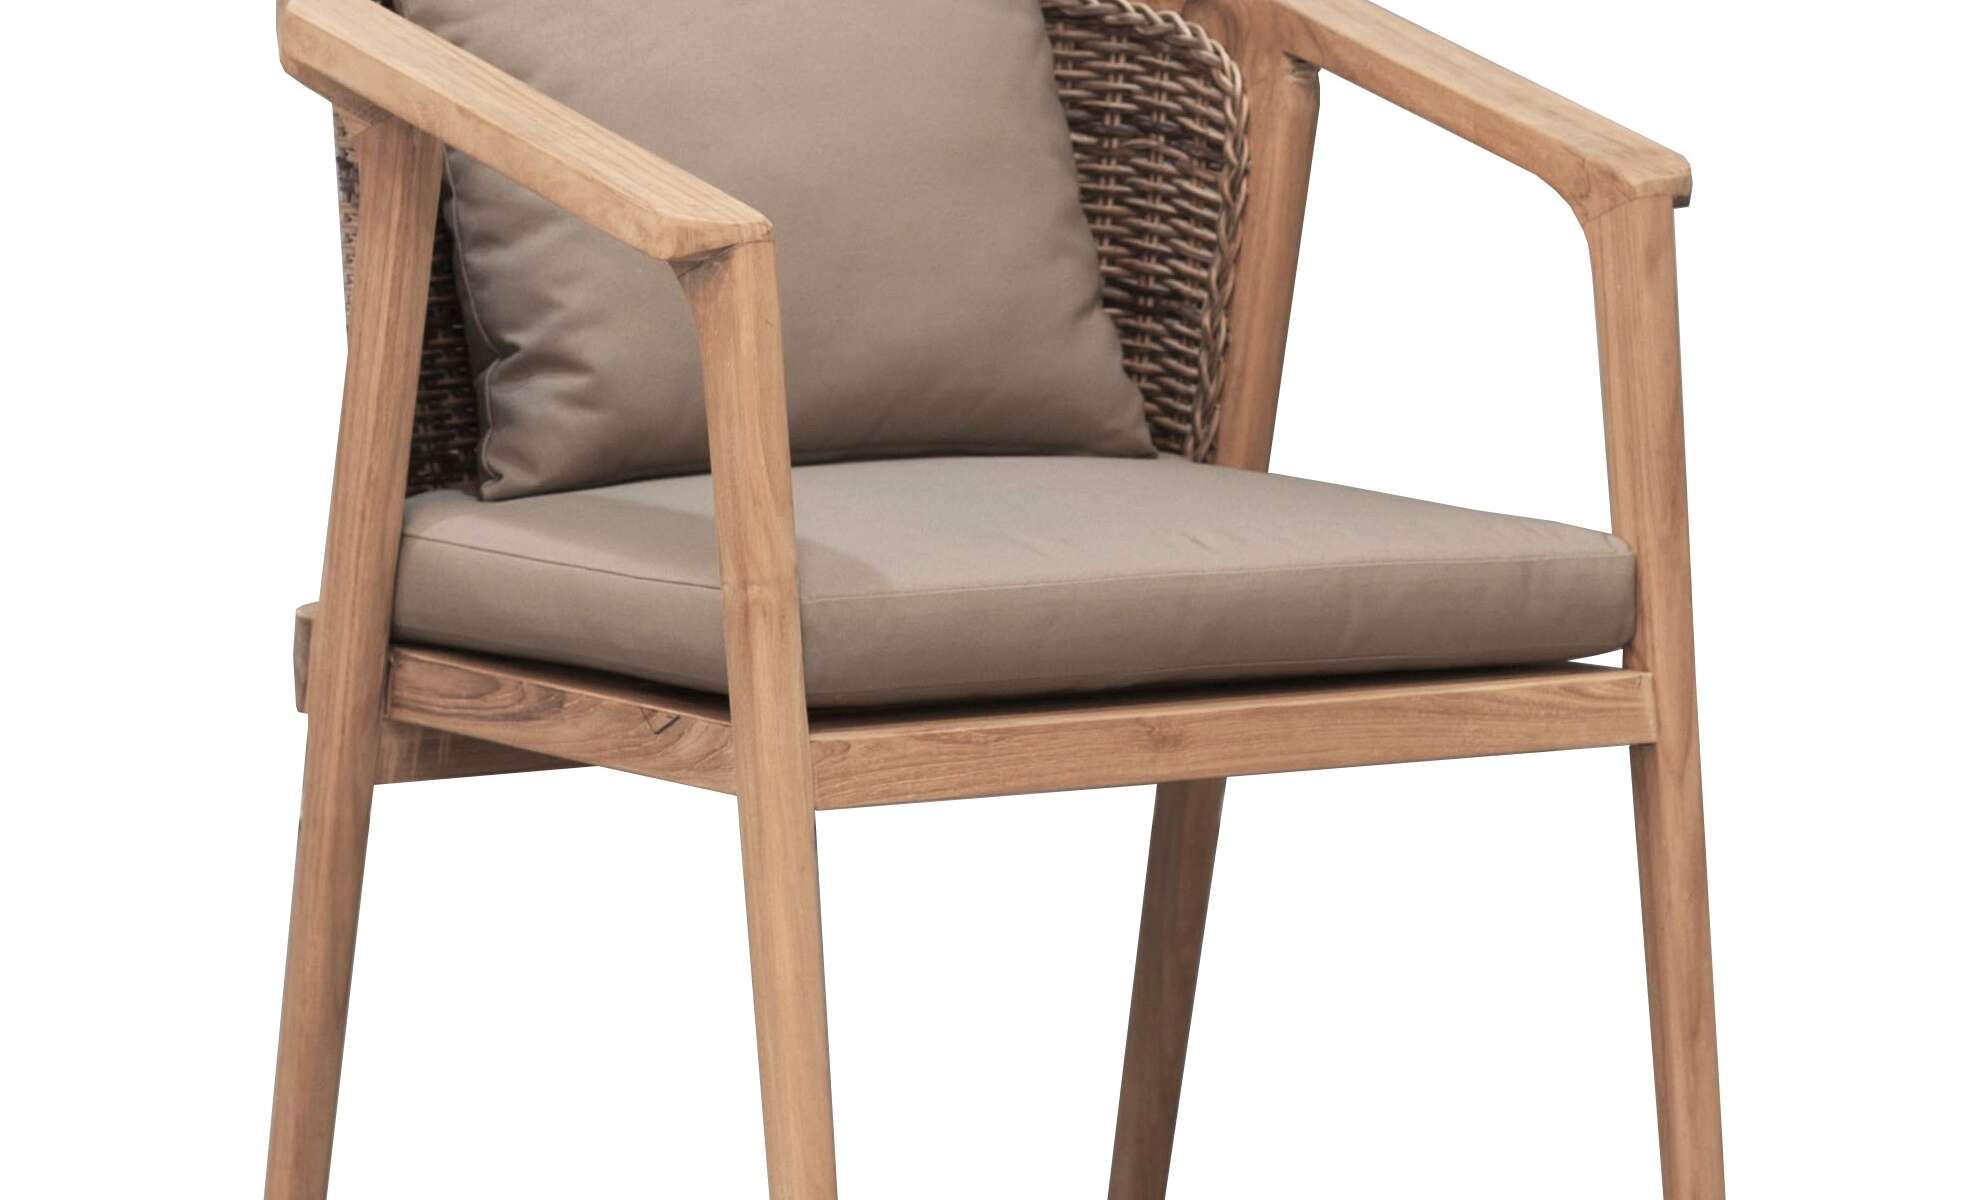 Teak and Woven REsin Outdoor Chair Small